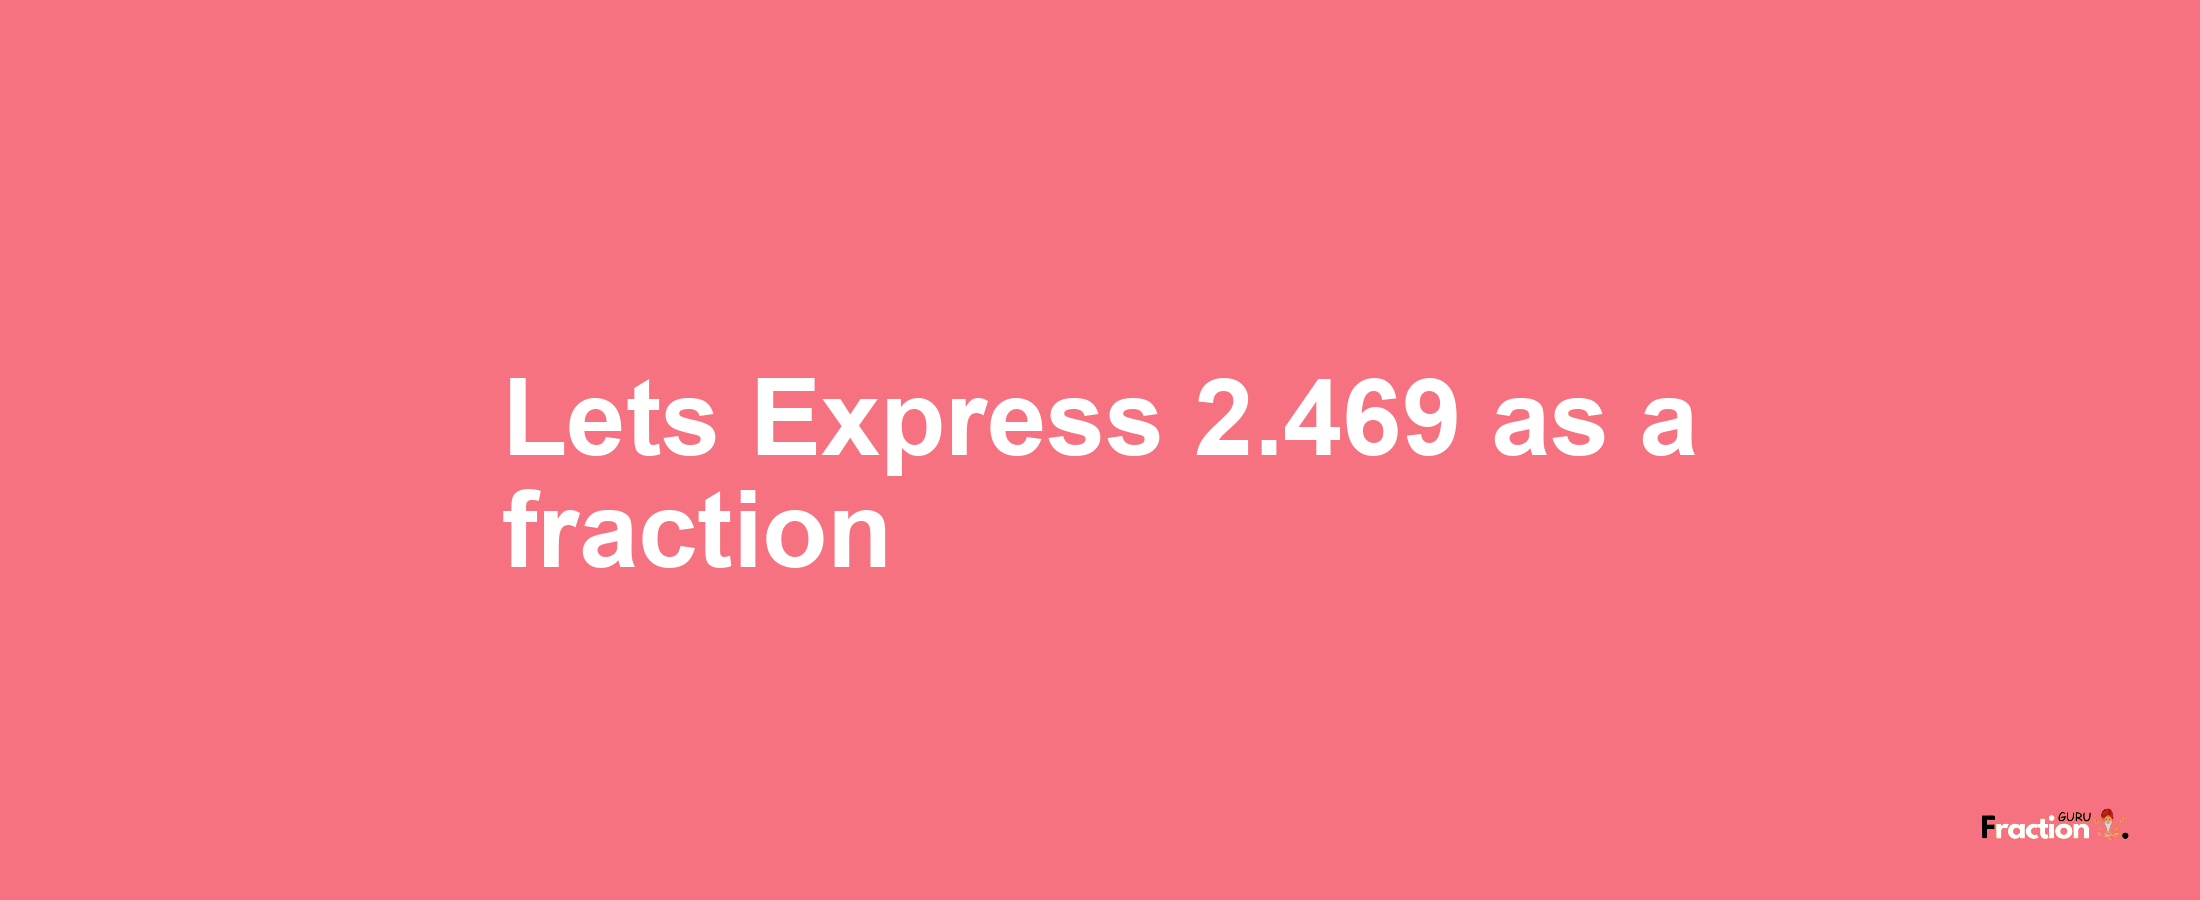 Lets Express 2.469 as afraction